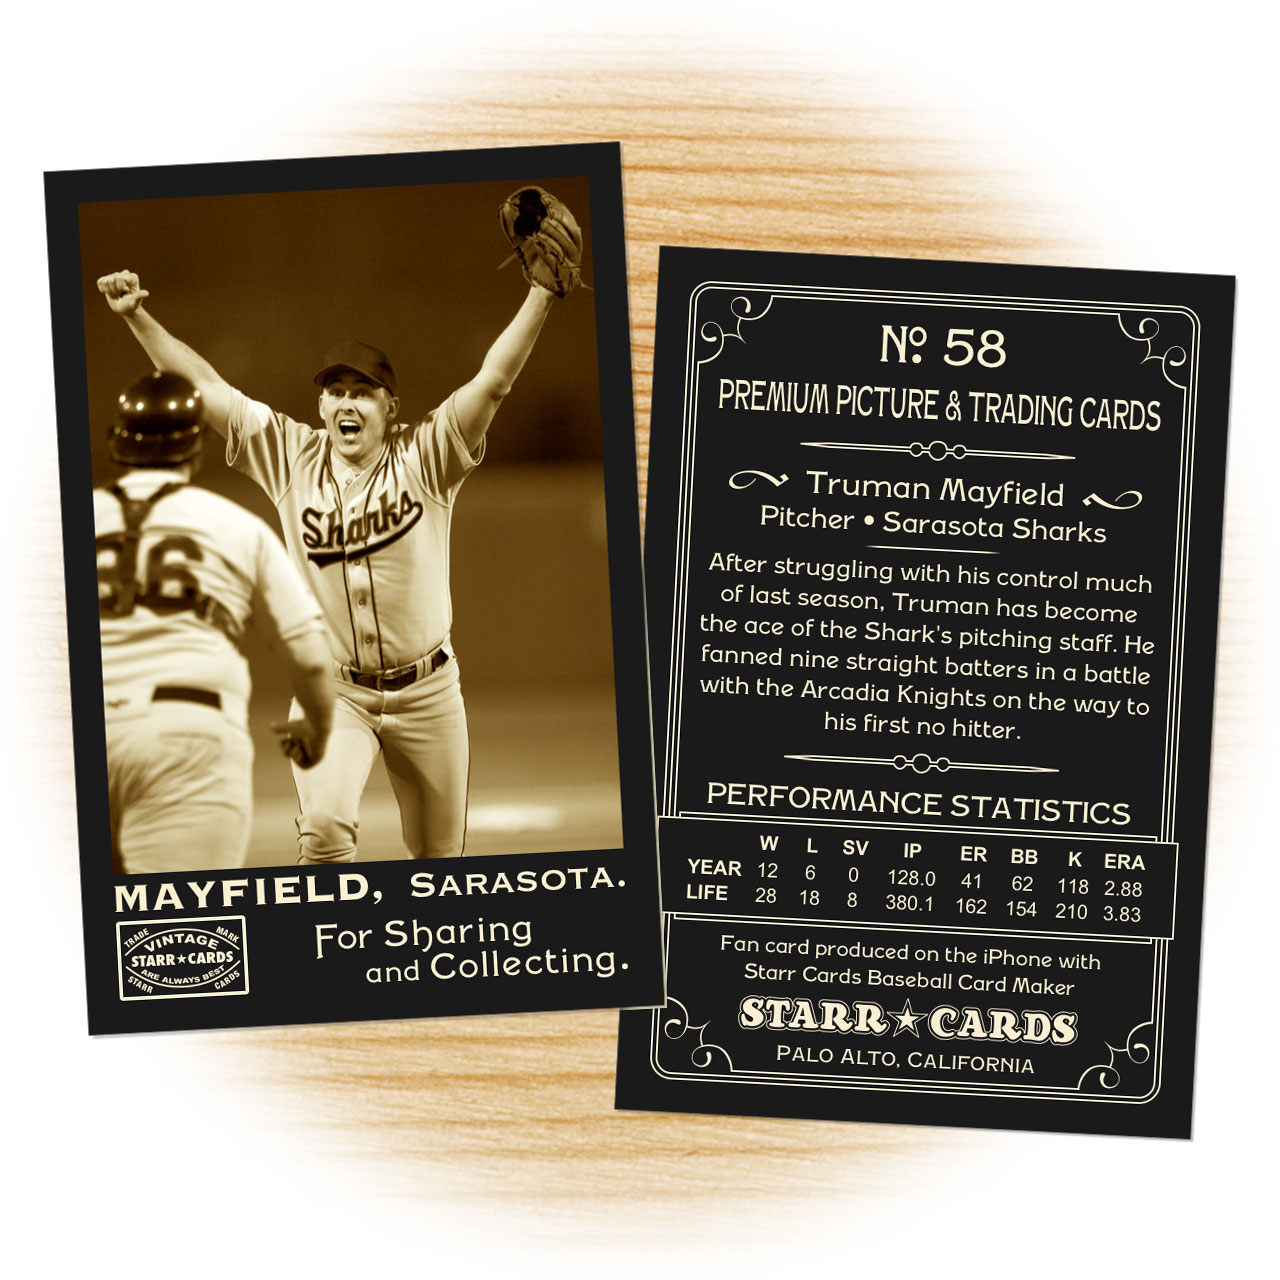 make-your-own-baseball-card-with-starr-cards